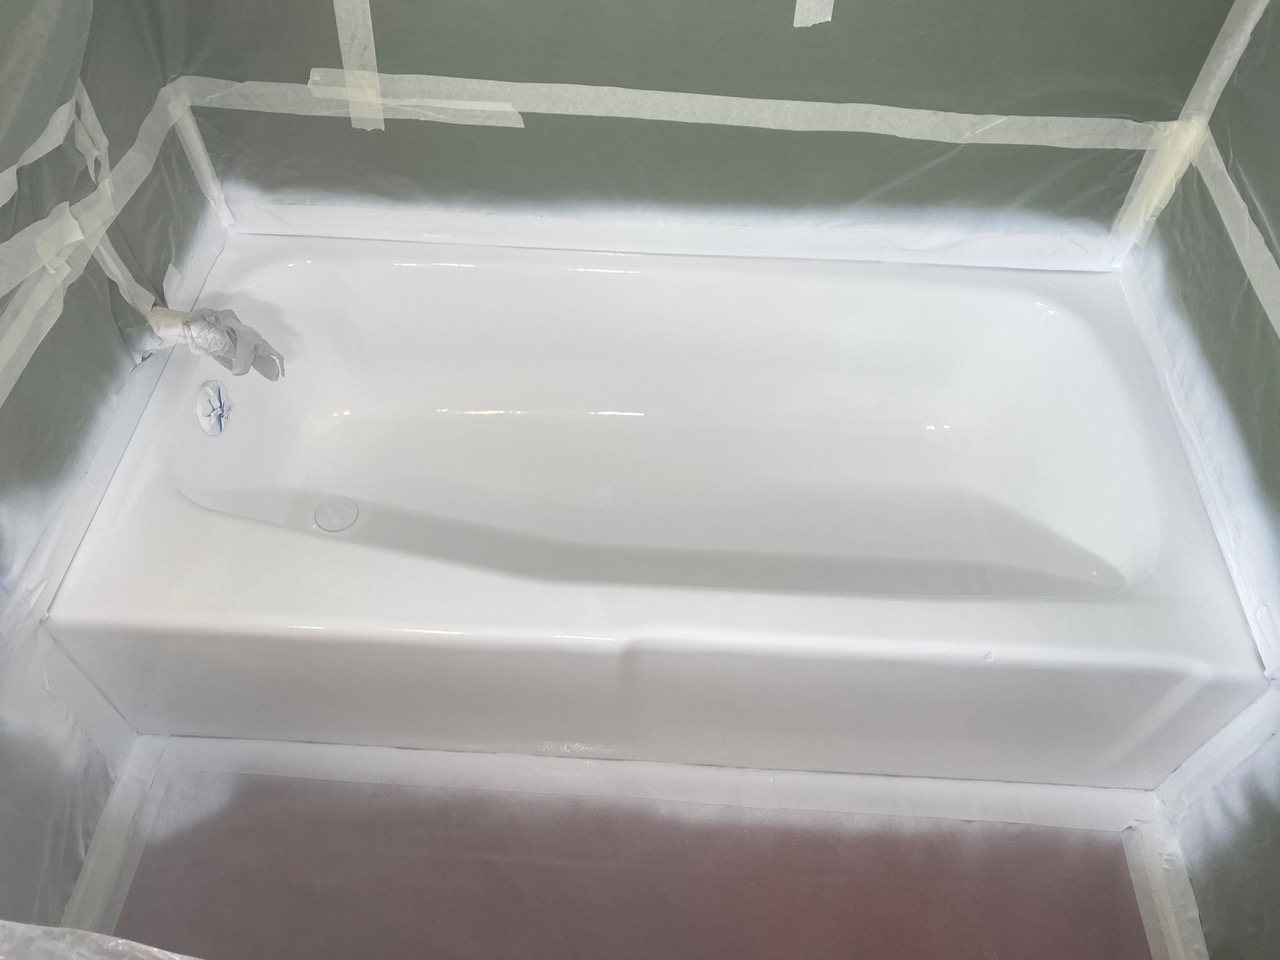 A white bathtub is being painted in a bathroom.